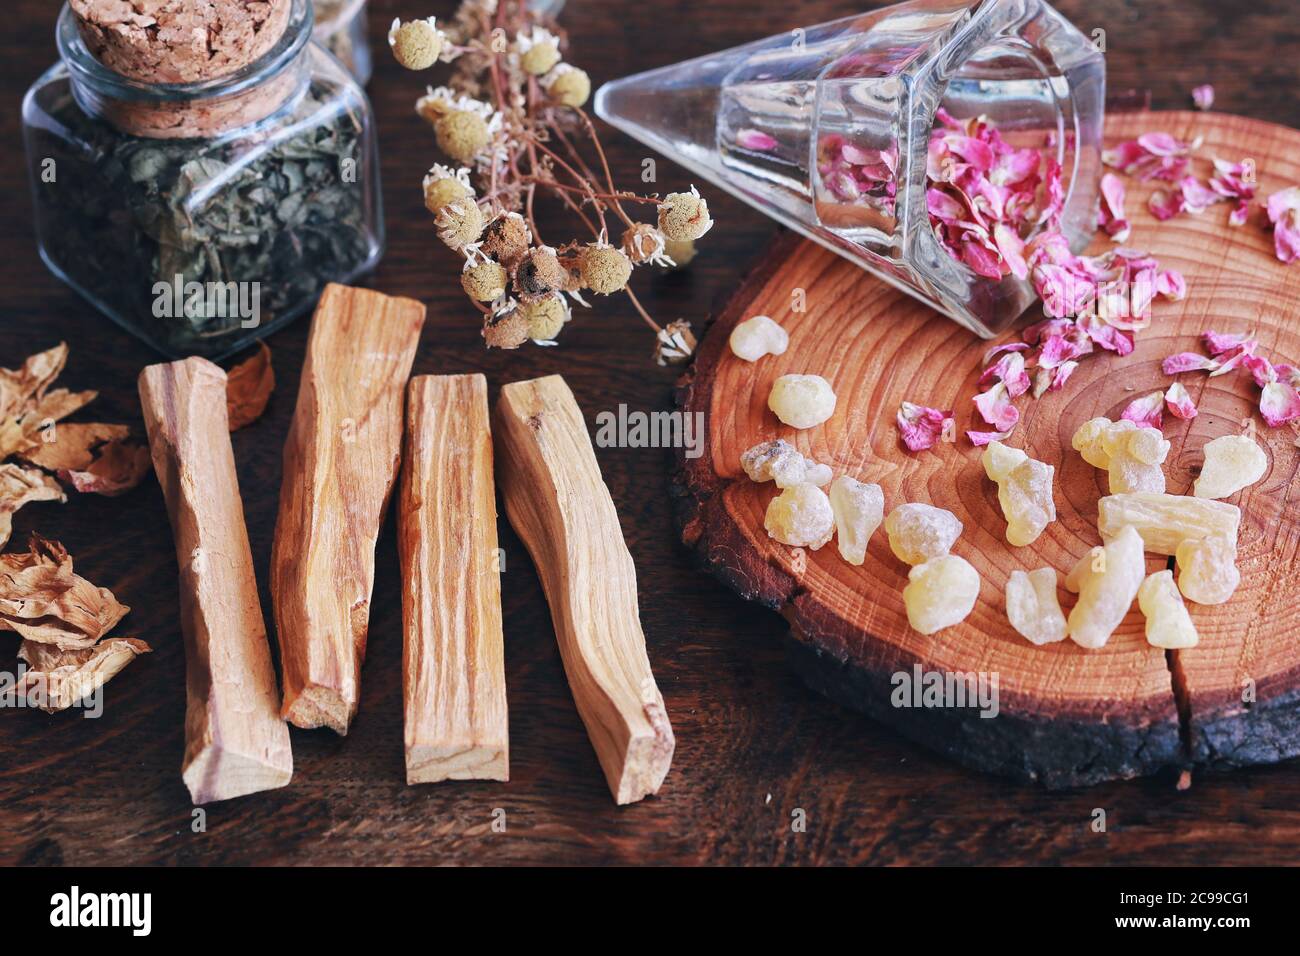 Palo Santo sticks from Bursera graveolens (holy wood) tree on wiccan witch altar, ready for smoke cleansing energy clearing of bad vibes Stock Photo